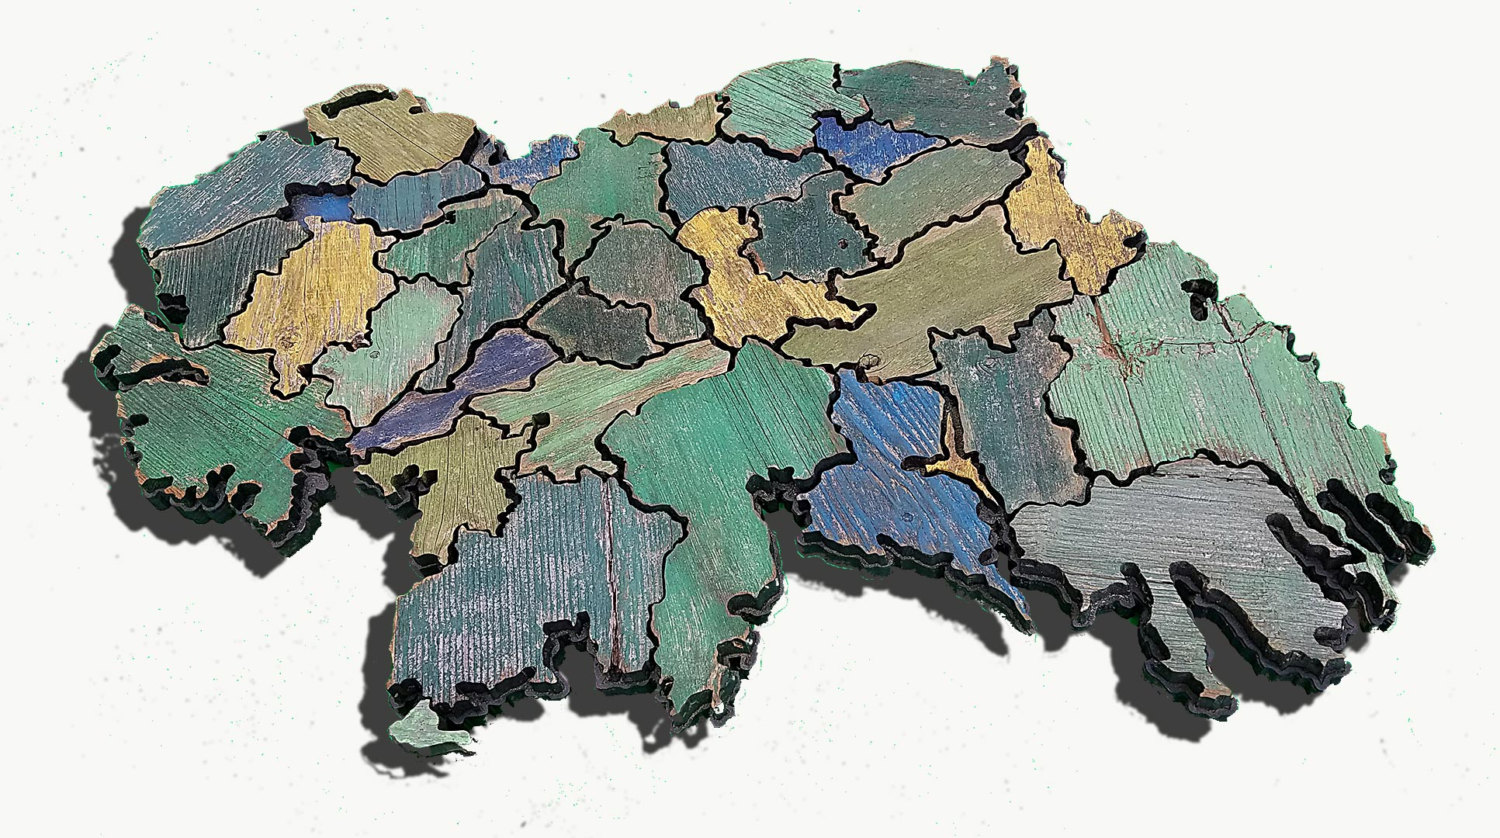 Map of Ireland made from Reclaimed fencing, recycled, reclaimed wooden map, vintage, rustic fine art one of a kind Irish piece.